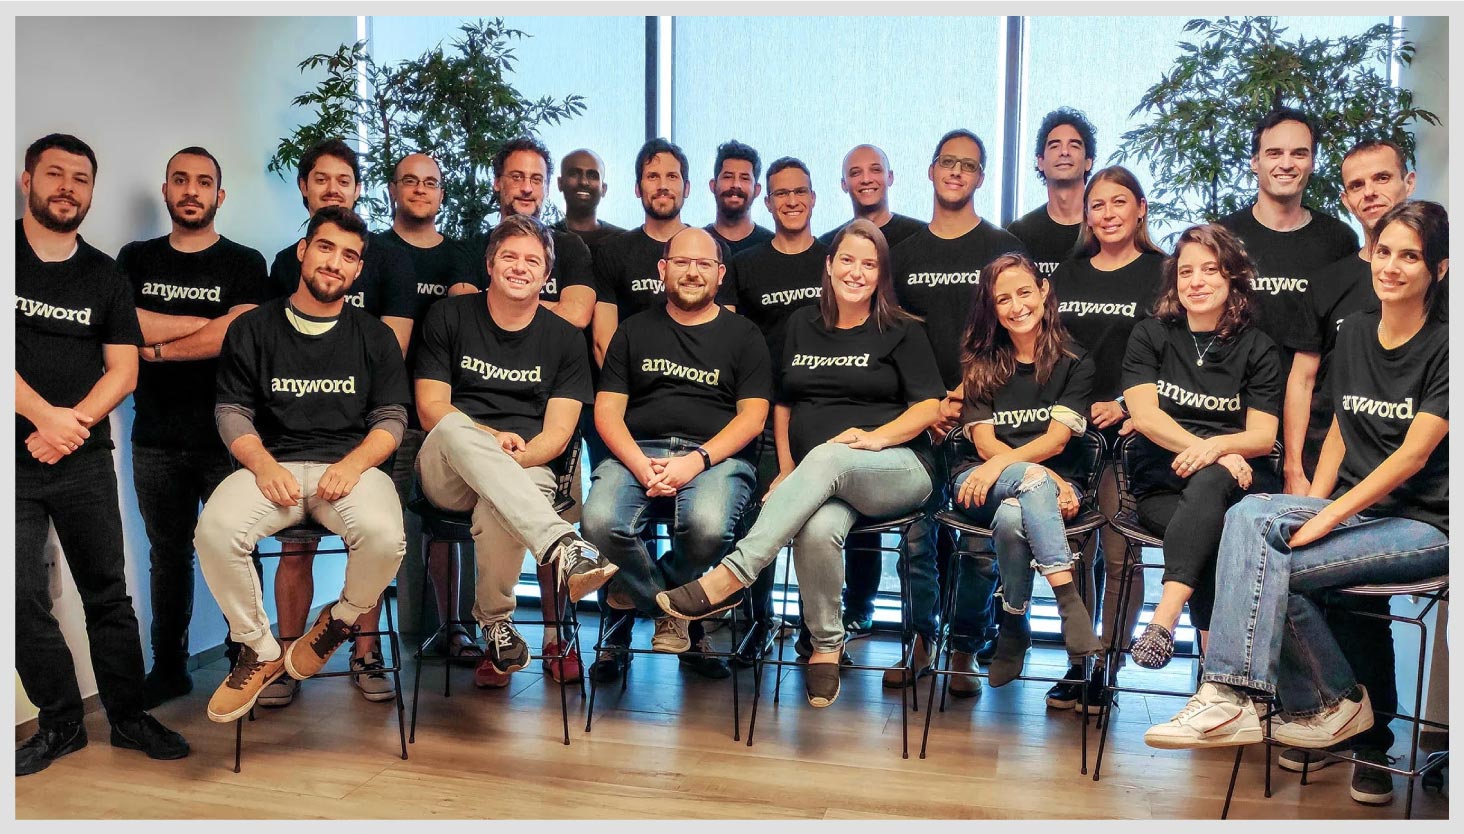 Photograph of the Anyword team